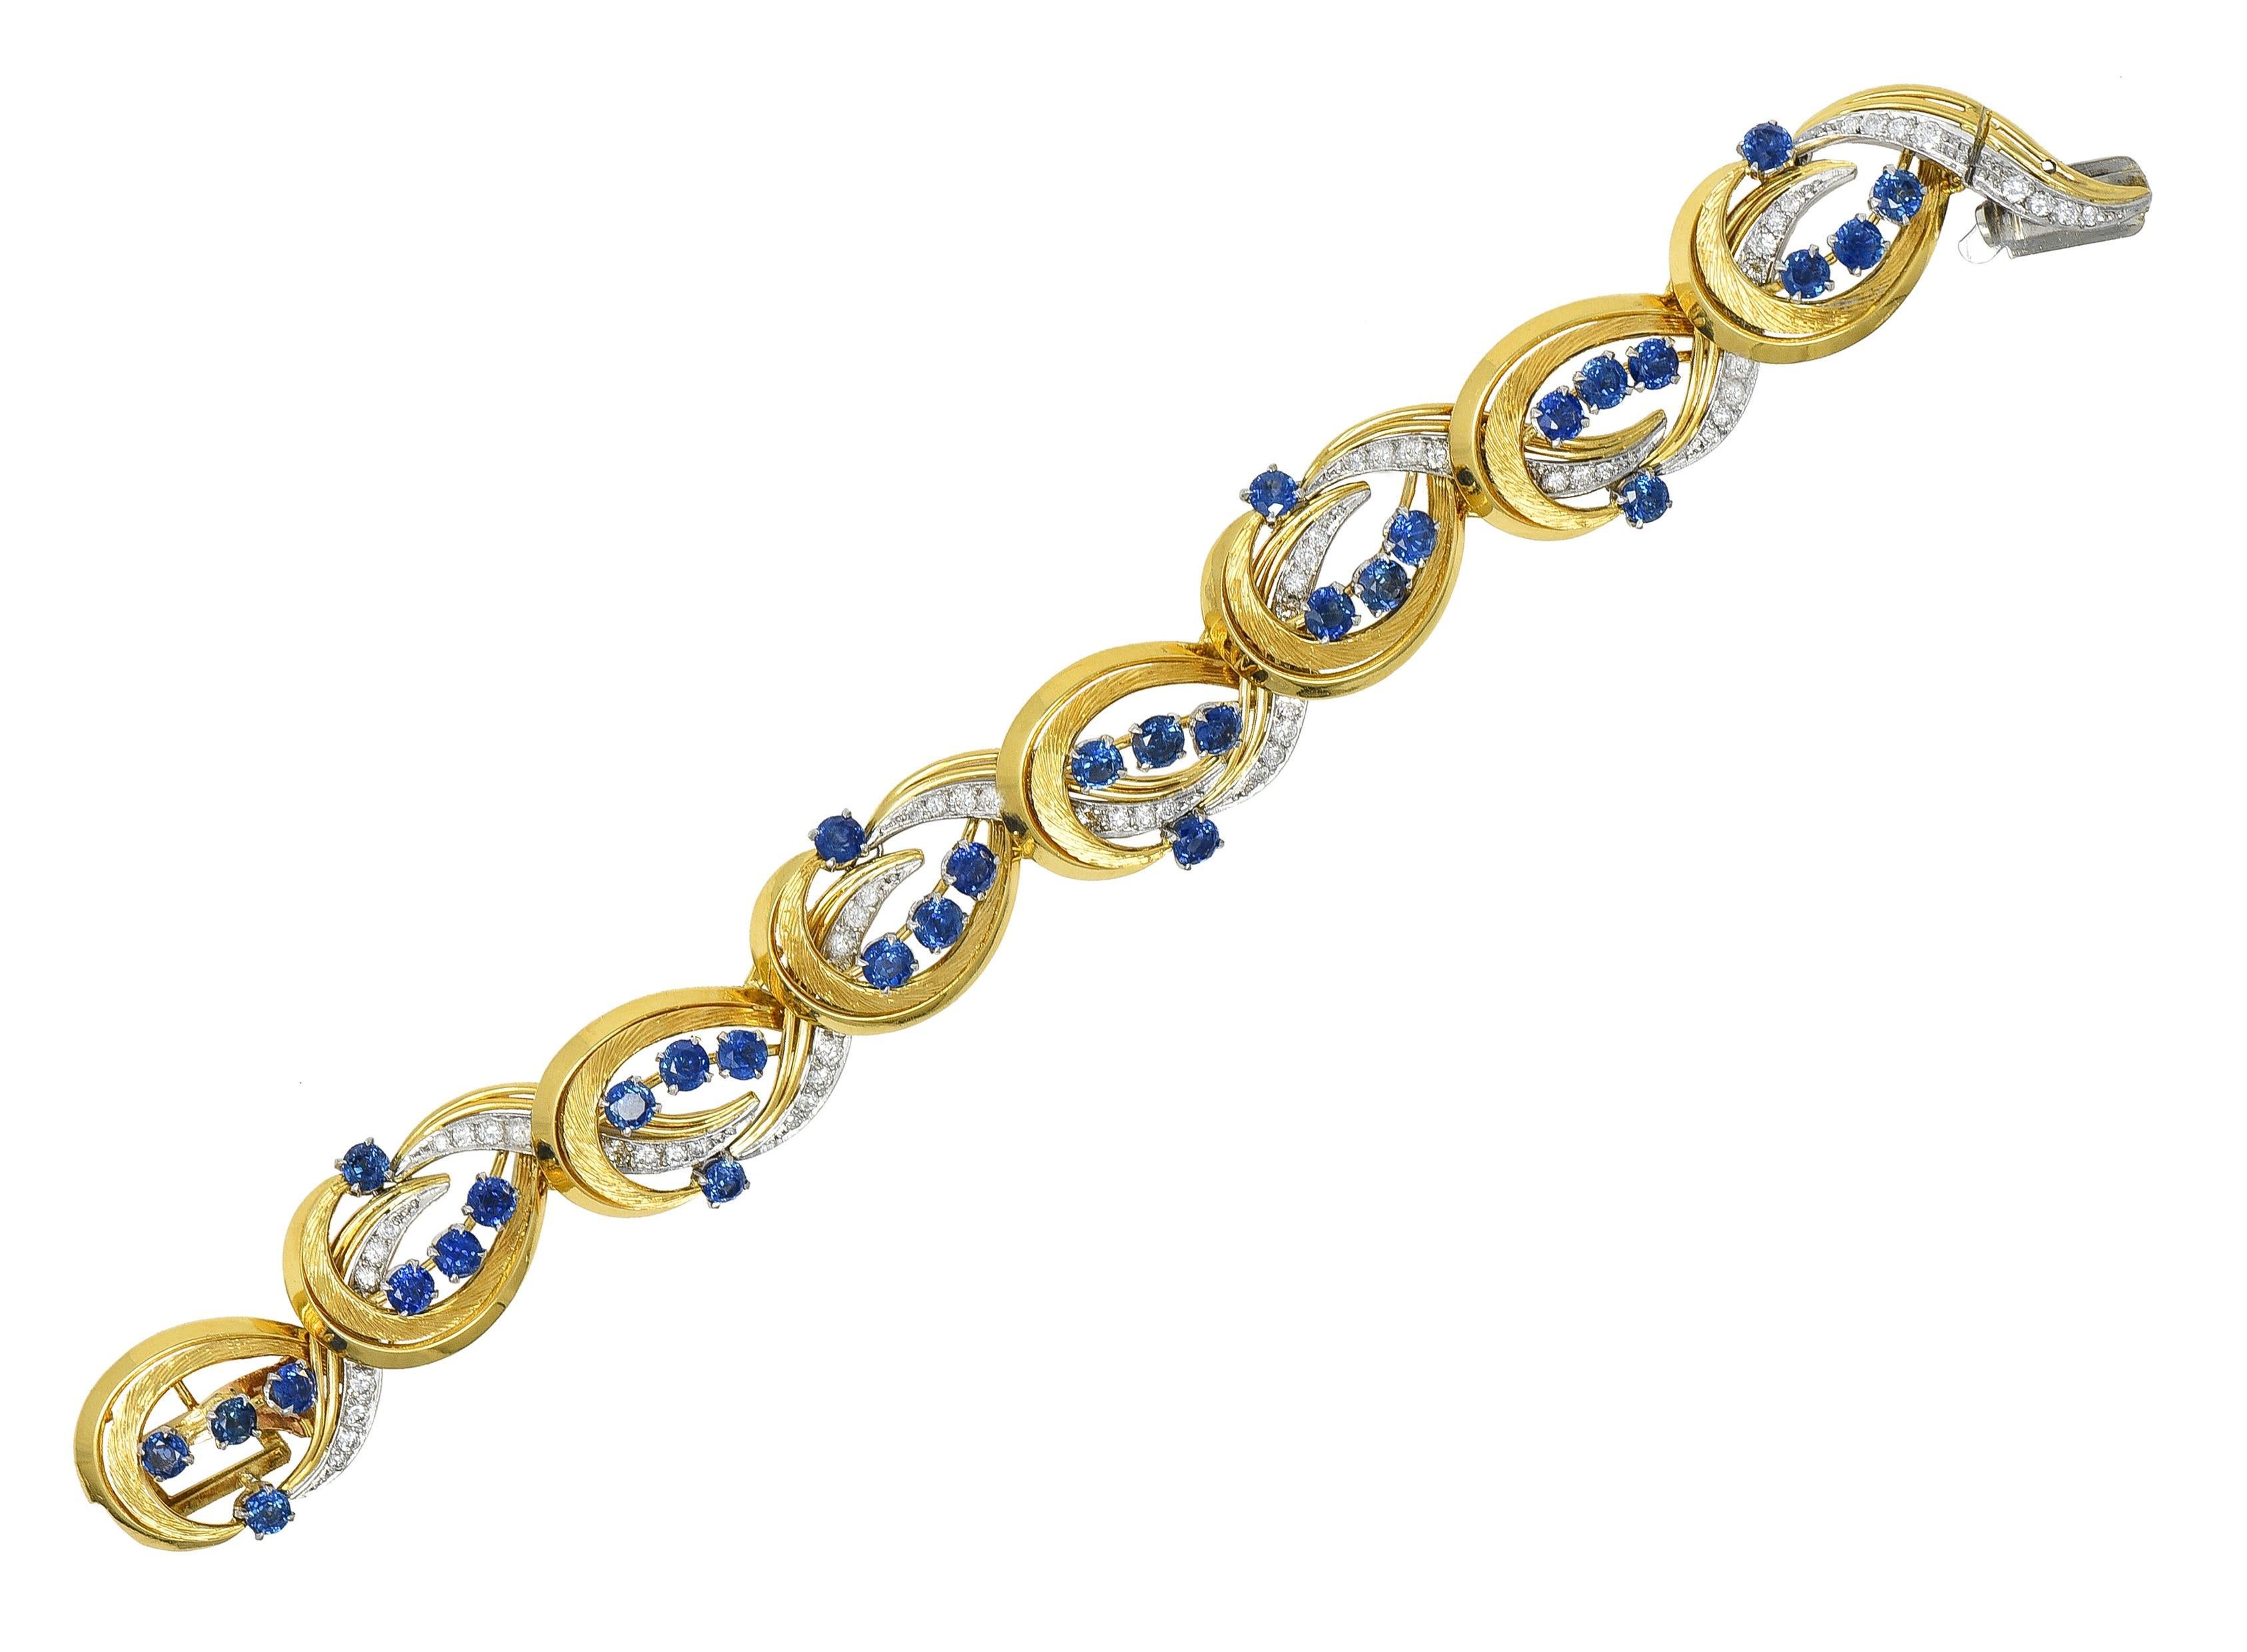 Comprised of hinged links with dimensional yellow gold and platinum scrolls accented by engraved texture
Featuring round cut sapphires throughout weighing approximately 7.20 carats total 
Transparent medium blue and prong set in platinum
With round